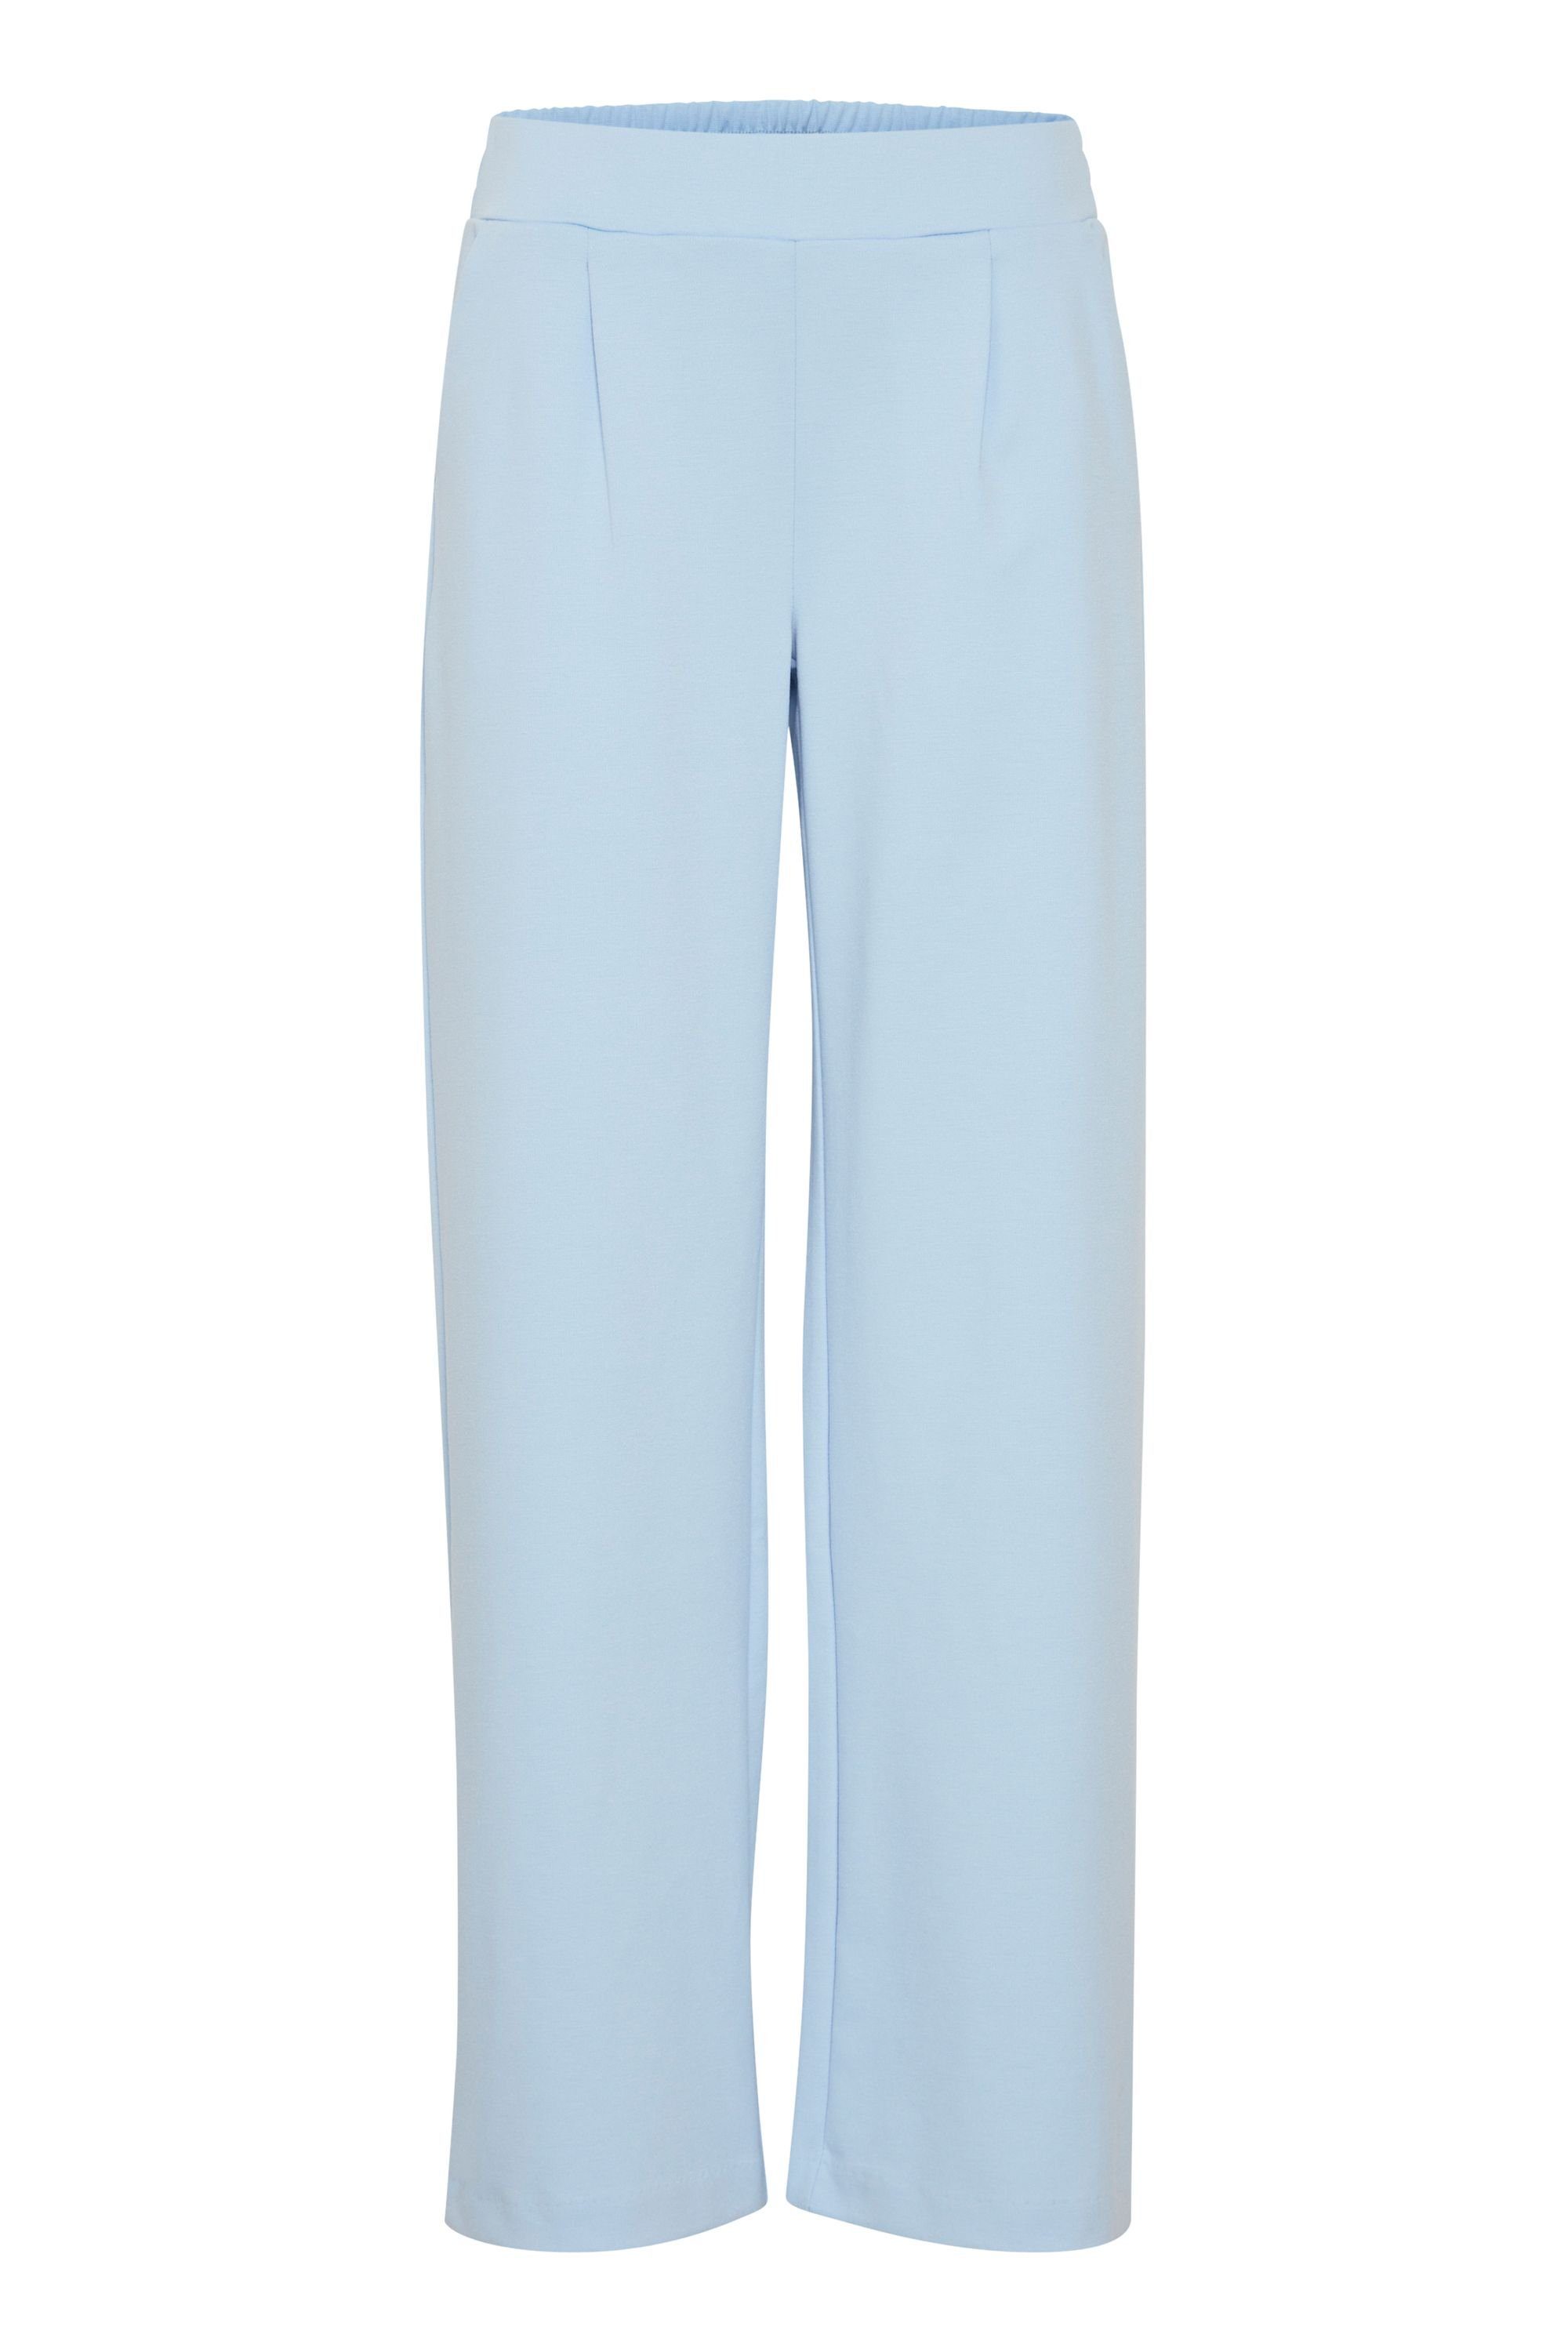 WIDE 20812847 - BYRIZETTA PANTS Stoffhose Blue 2 Bell 2 (144121) b.young